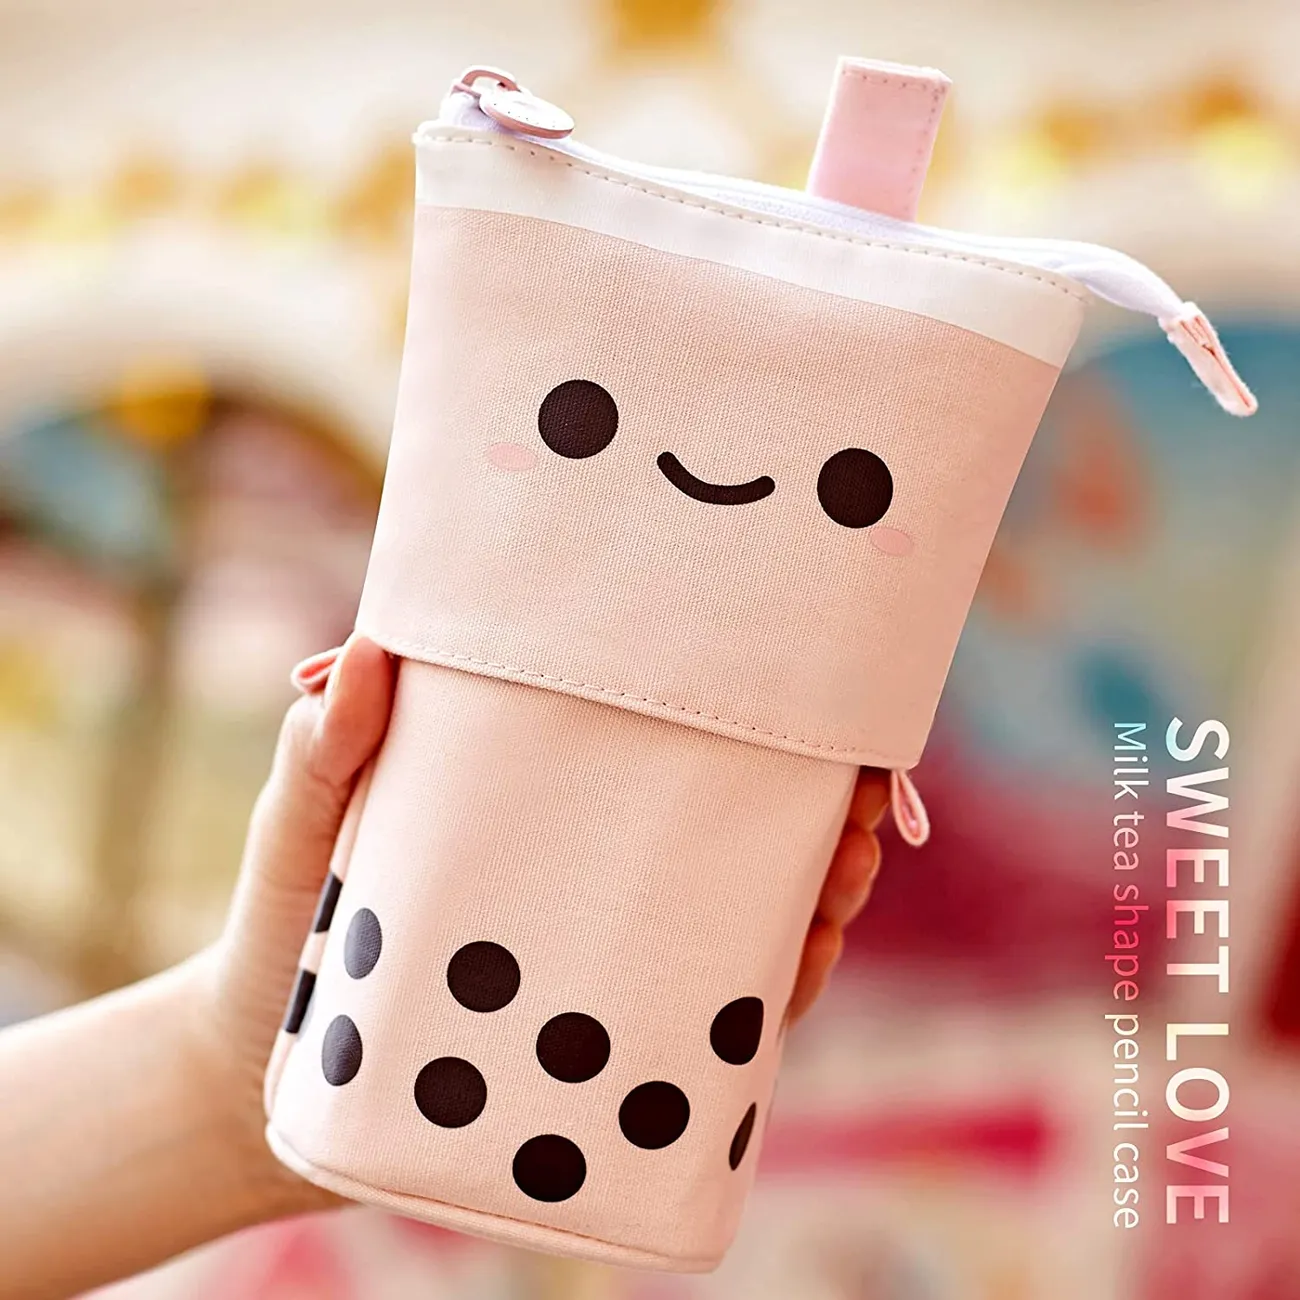 Home & Stuff Cute Telescopic Standing Design Pen Holder Pencil Case Stationery Can Be Pouch Gadget Travel Accessories Makeup Cosmetic Bag  big image 1